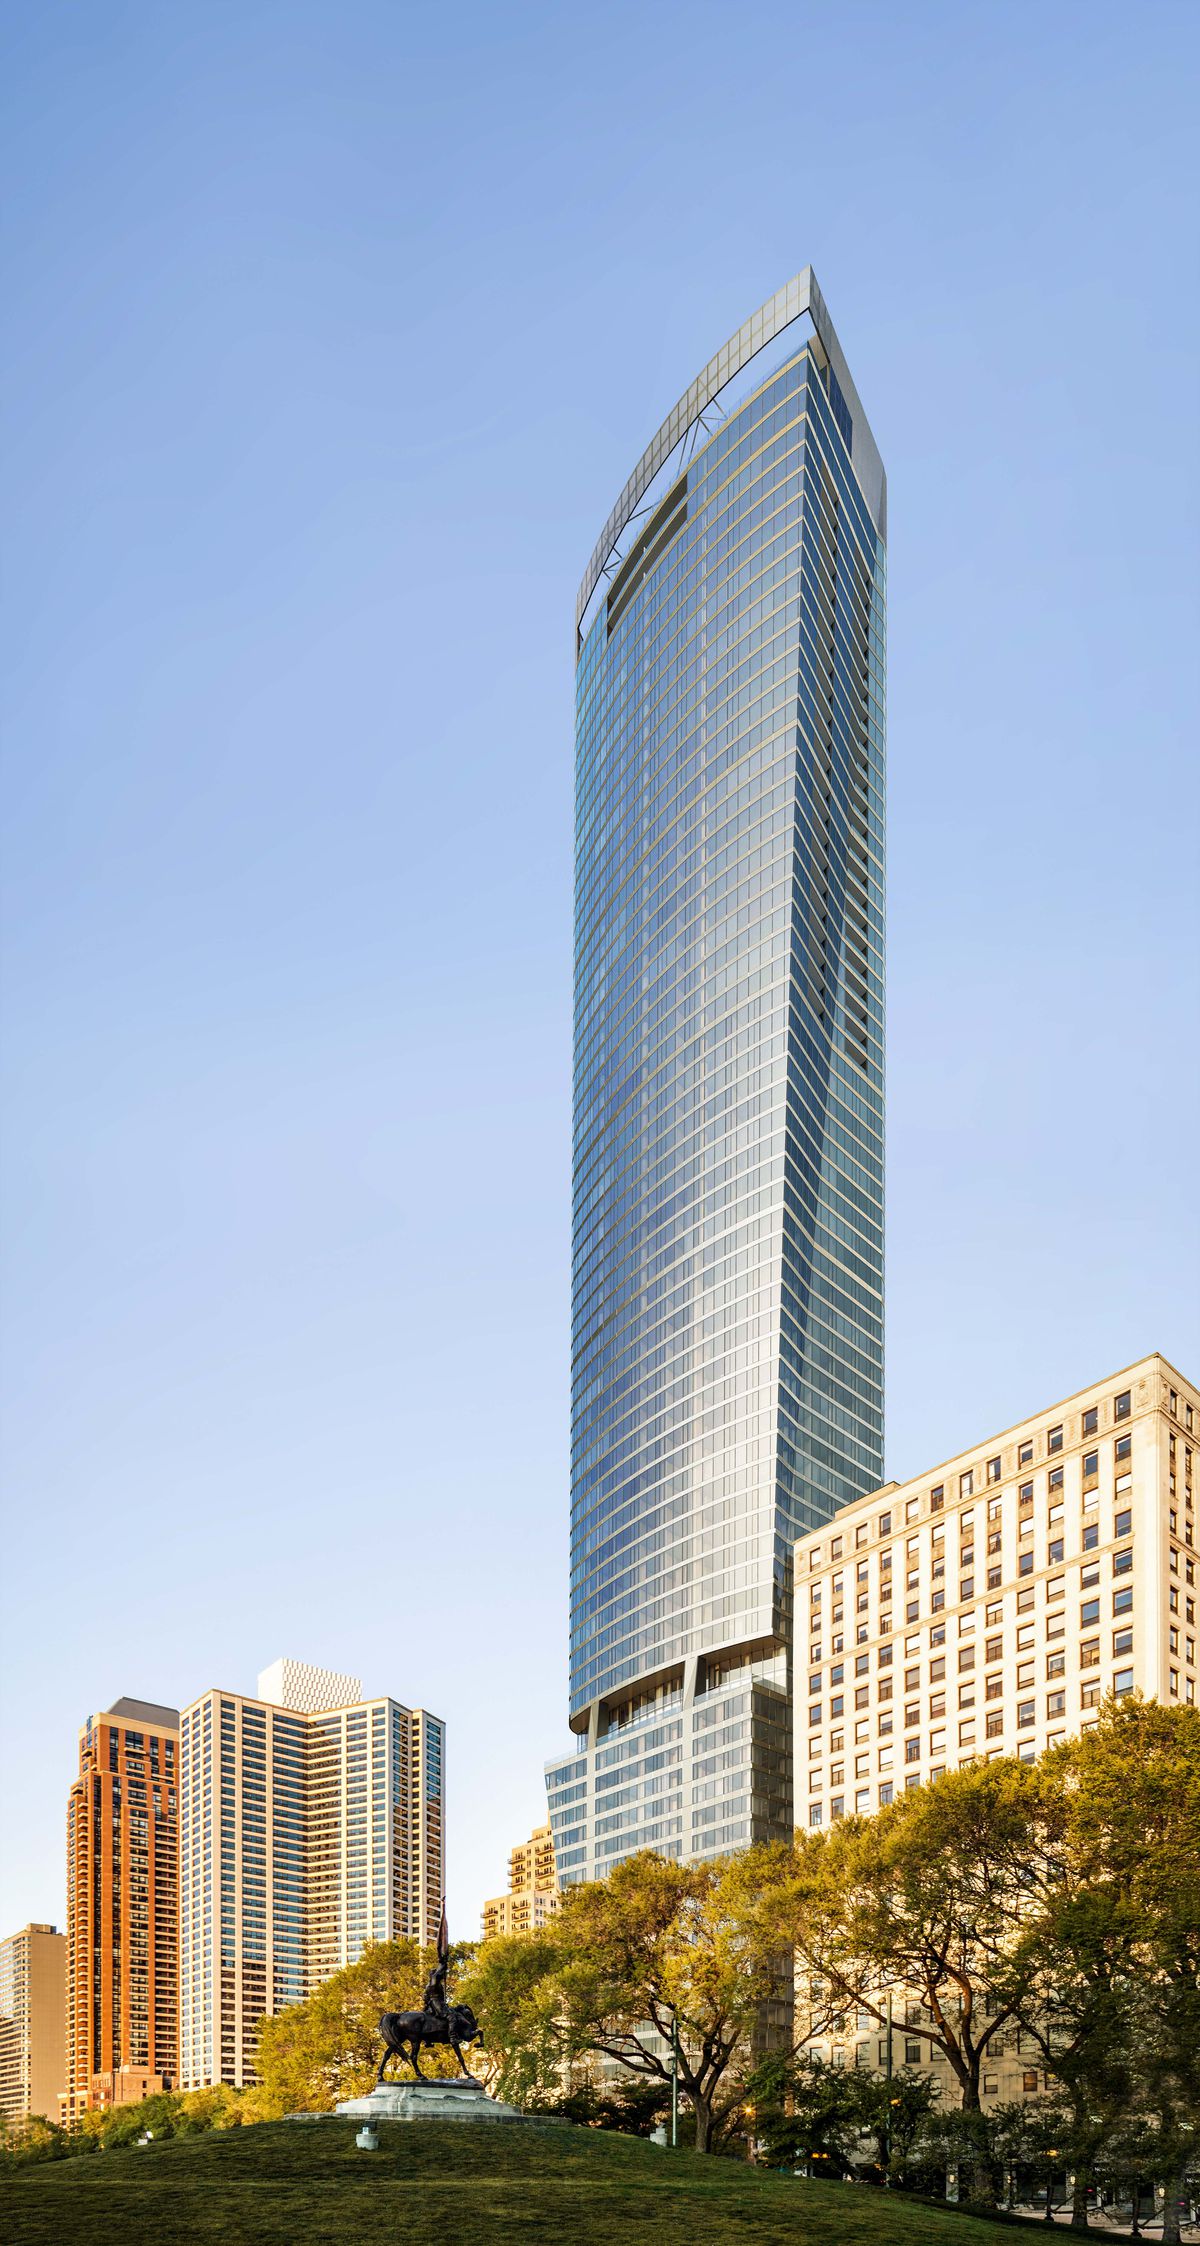 A ground-level rendering of a curving glass skyscraper viewed from a grassy green space. The tower is much taller than the buildings around it.